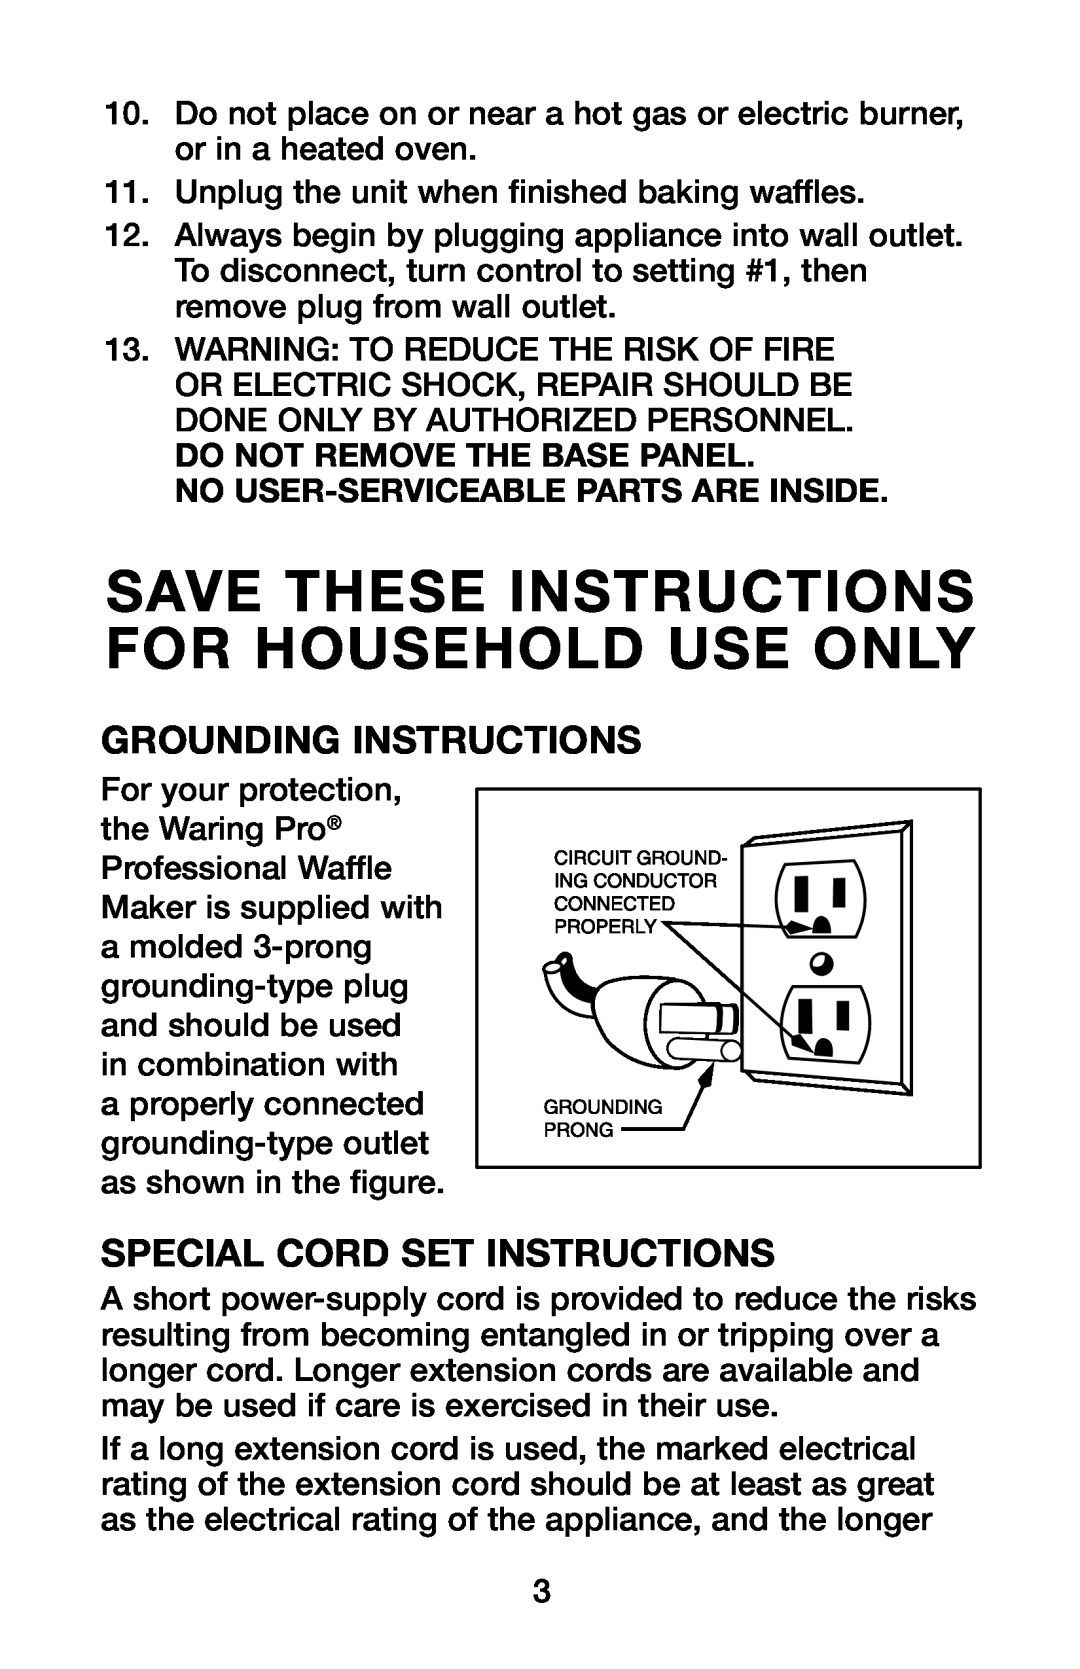 Waring WMK600 manual Save These Instructions For Household Use Only, Grounding Instructions, Special Cord Set Instructions 